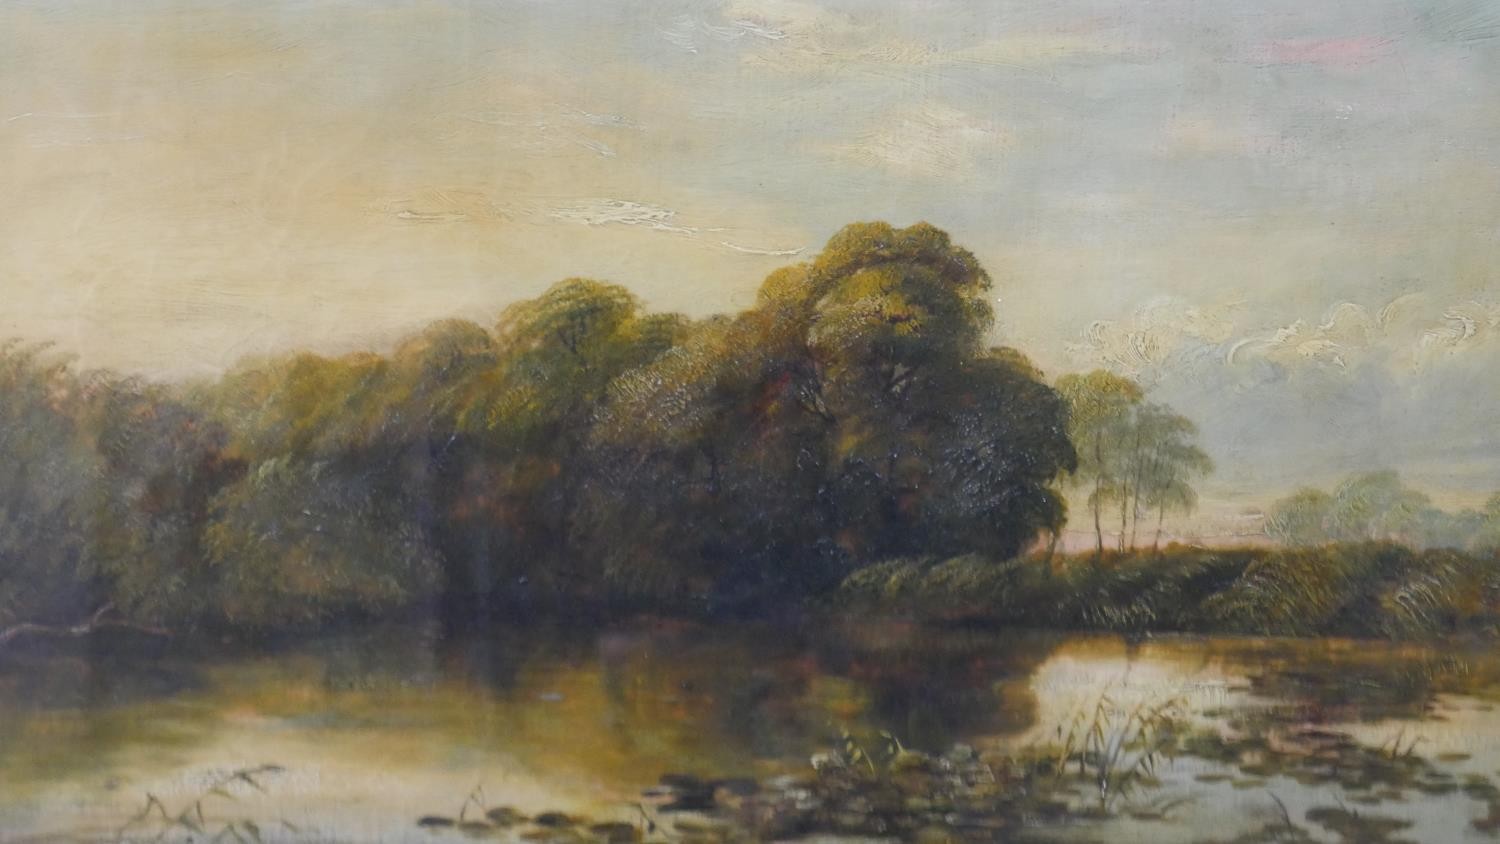 Sir Alfred East, ARA, British (1849 - 1913) - a 19th century oil on canvas of a lake scene at